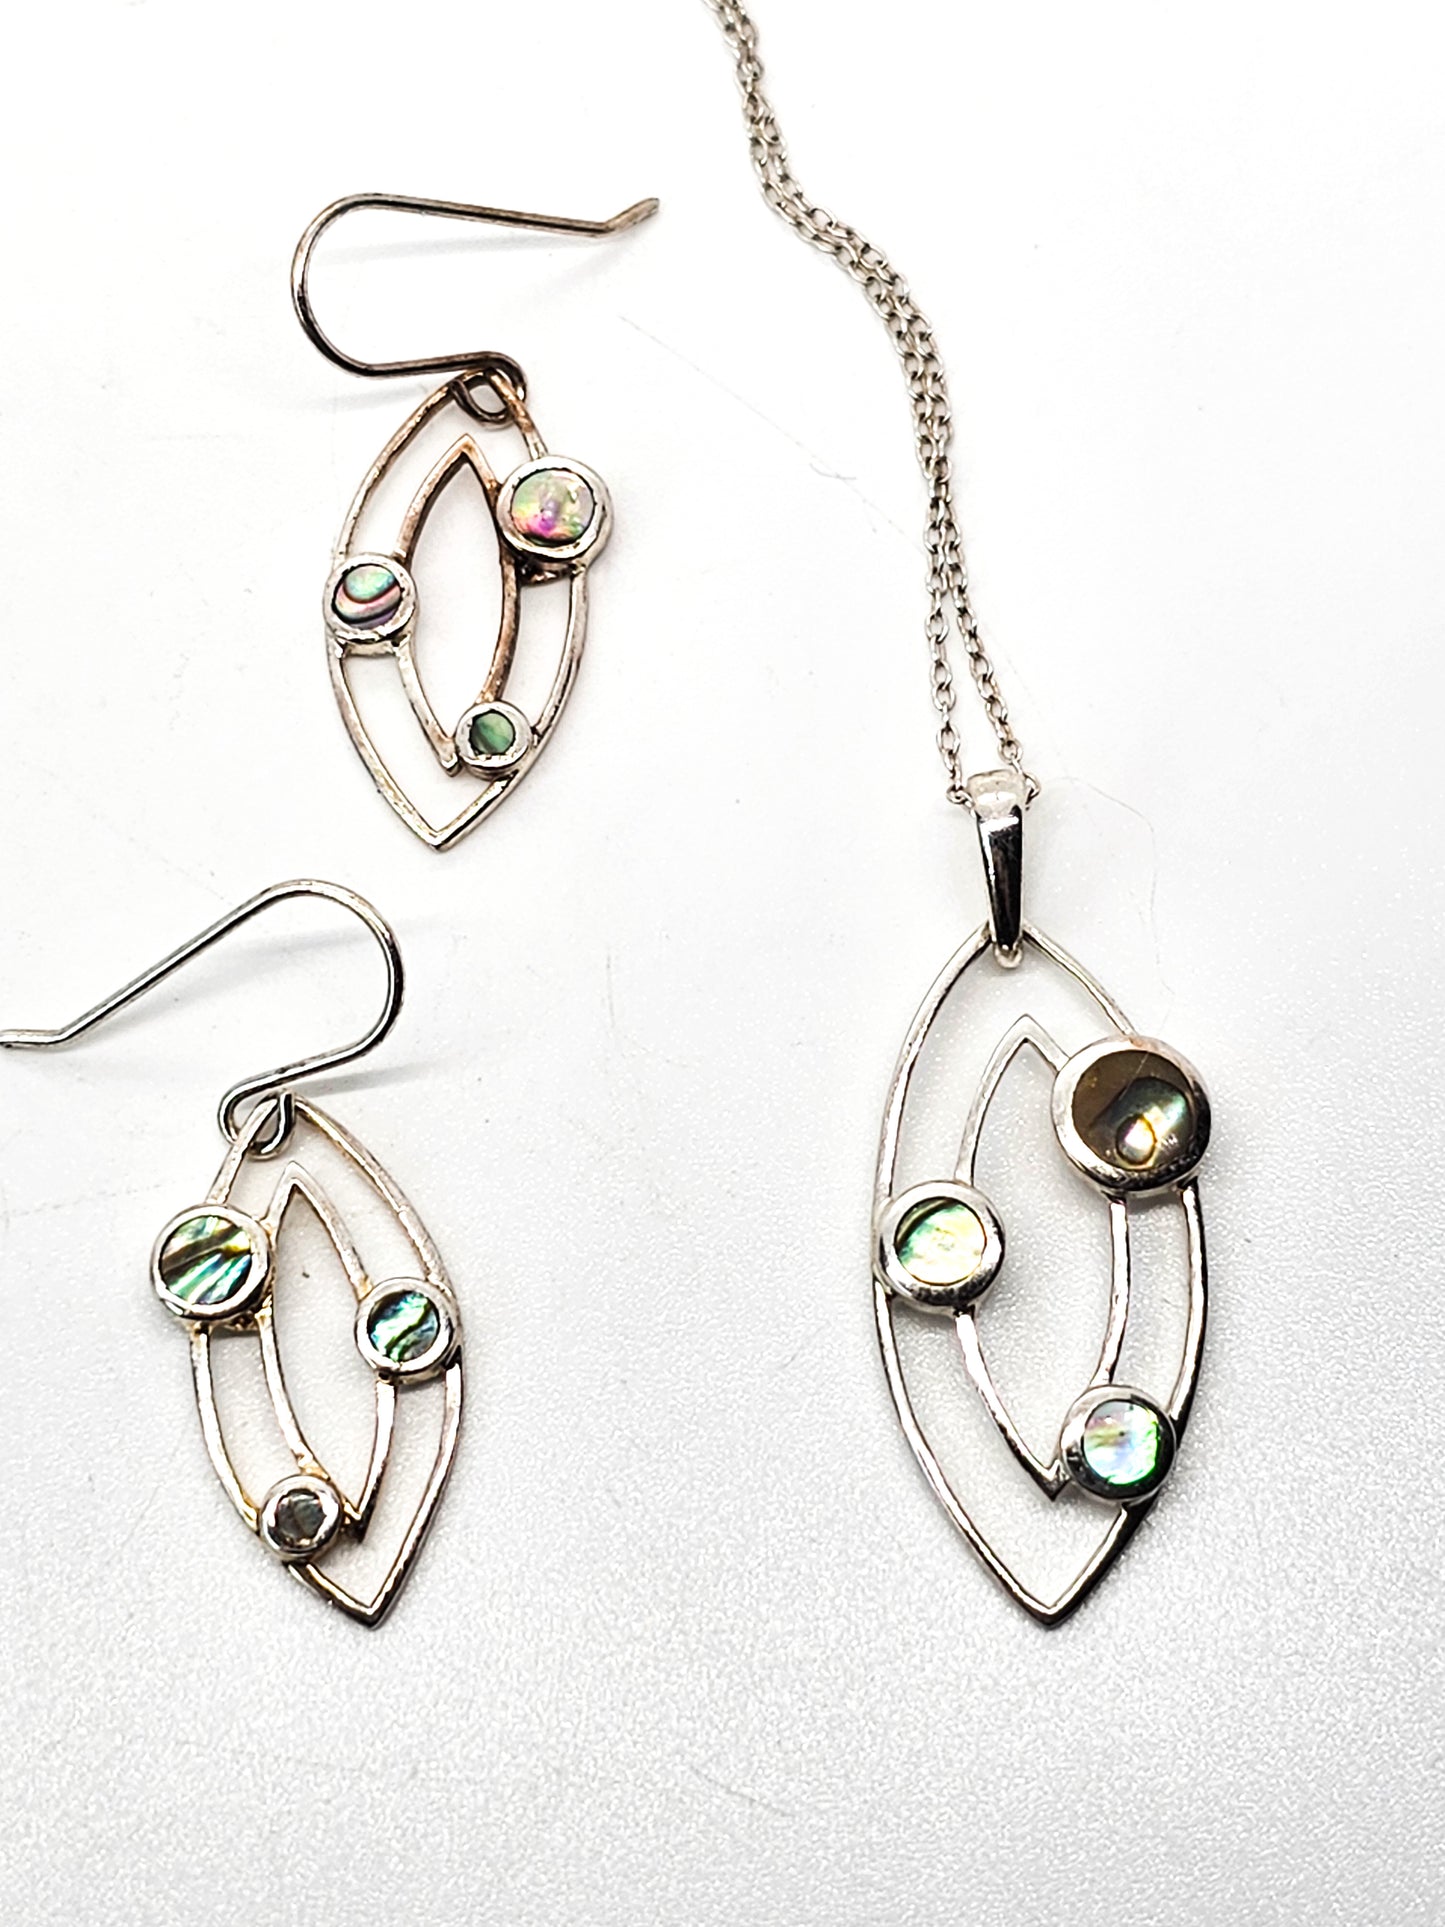 Atomic Abalone sterling silver vintage necklace and earrings set signed SU